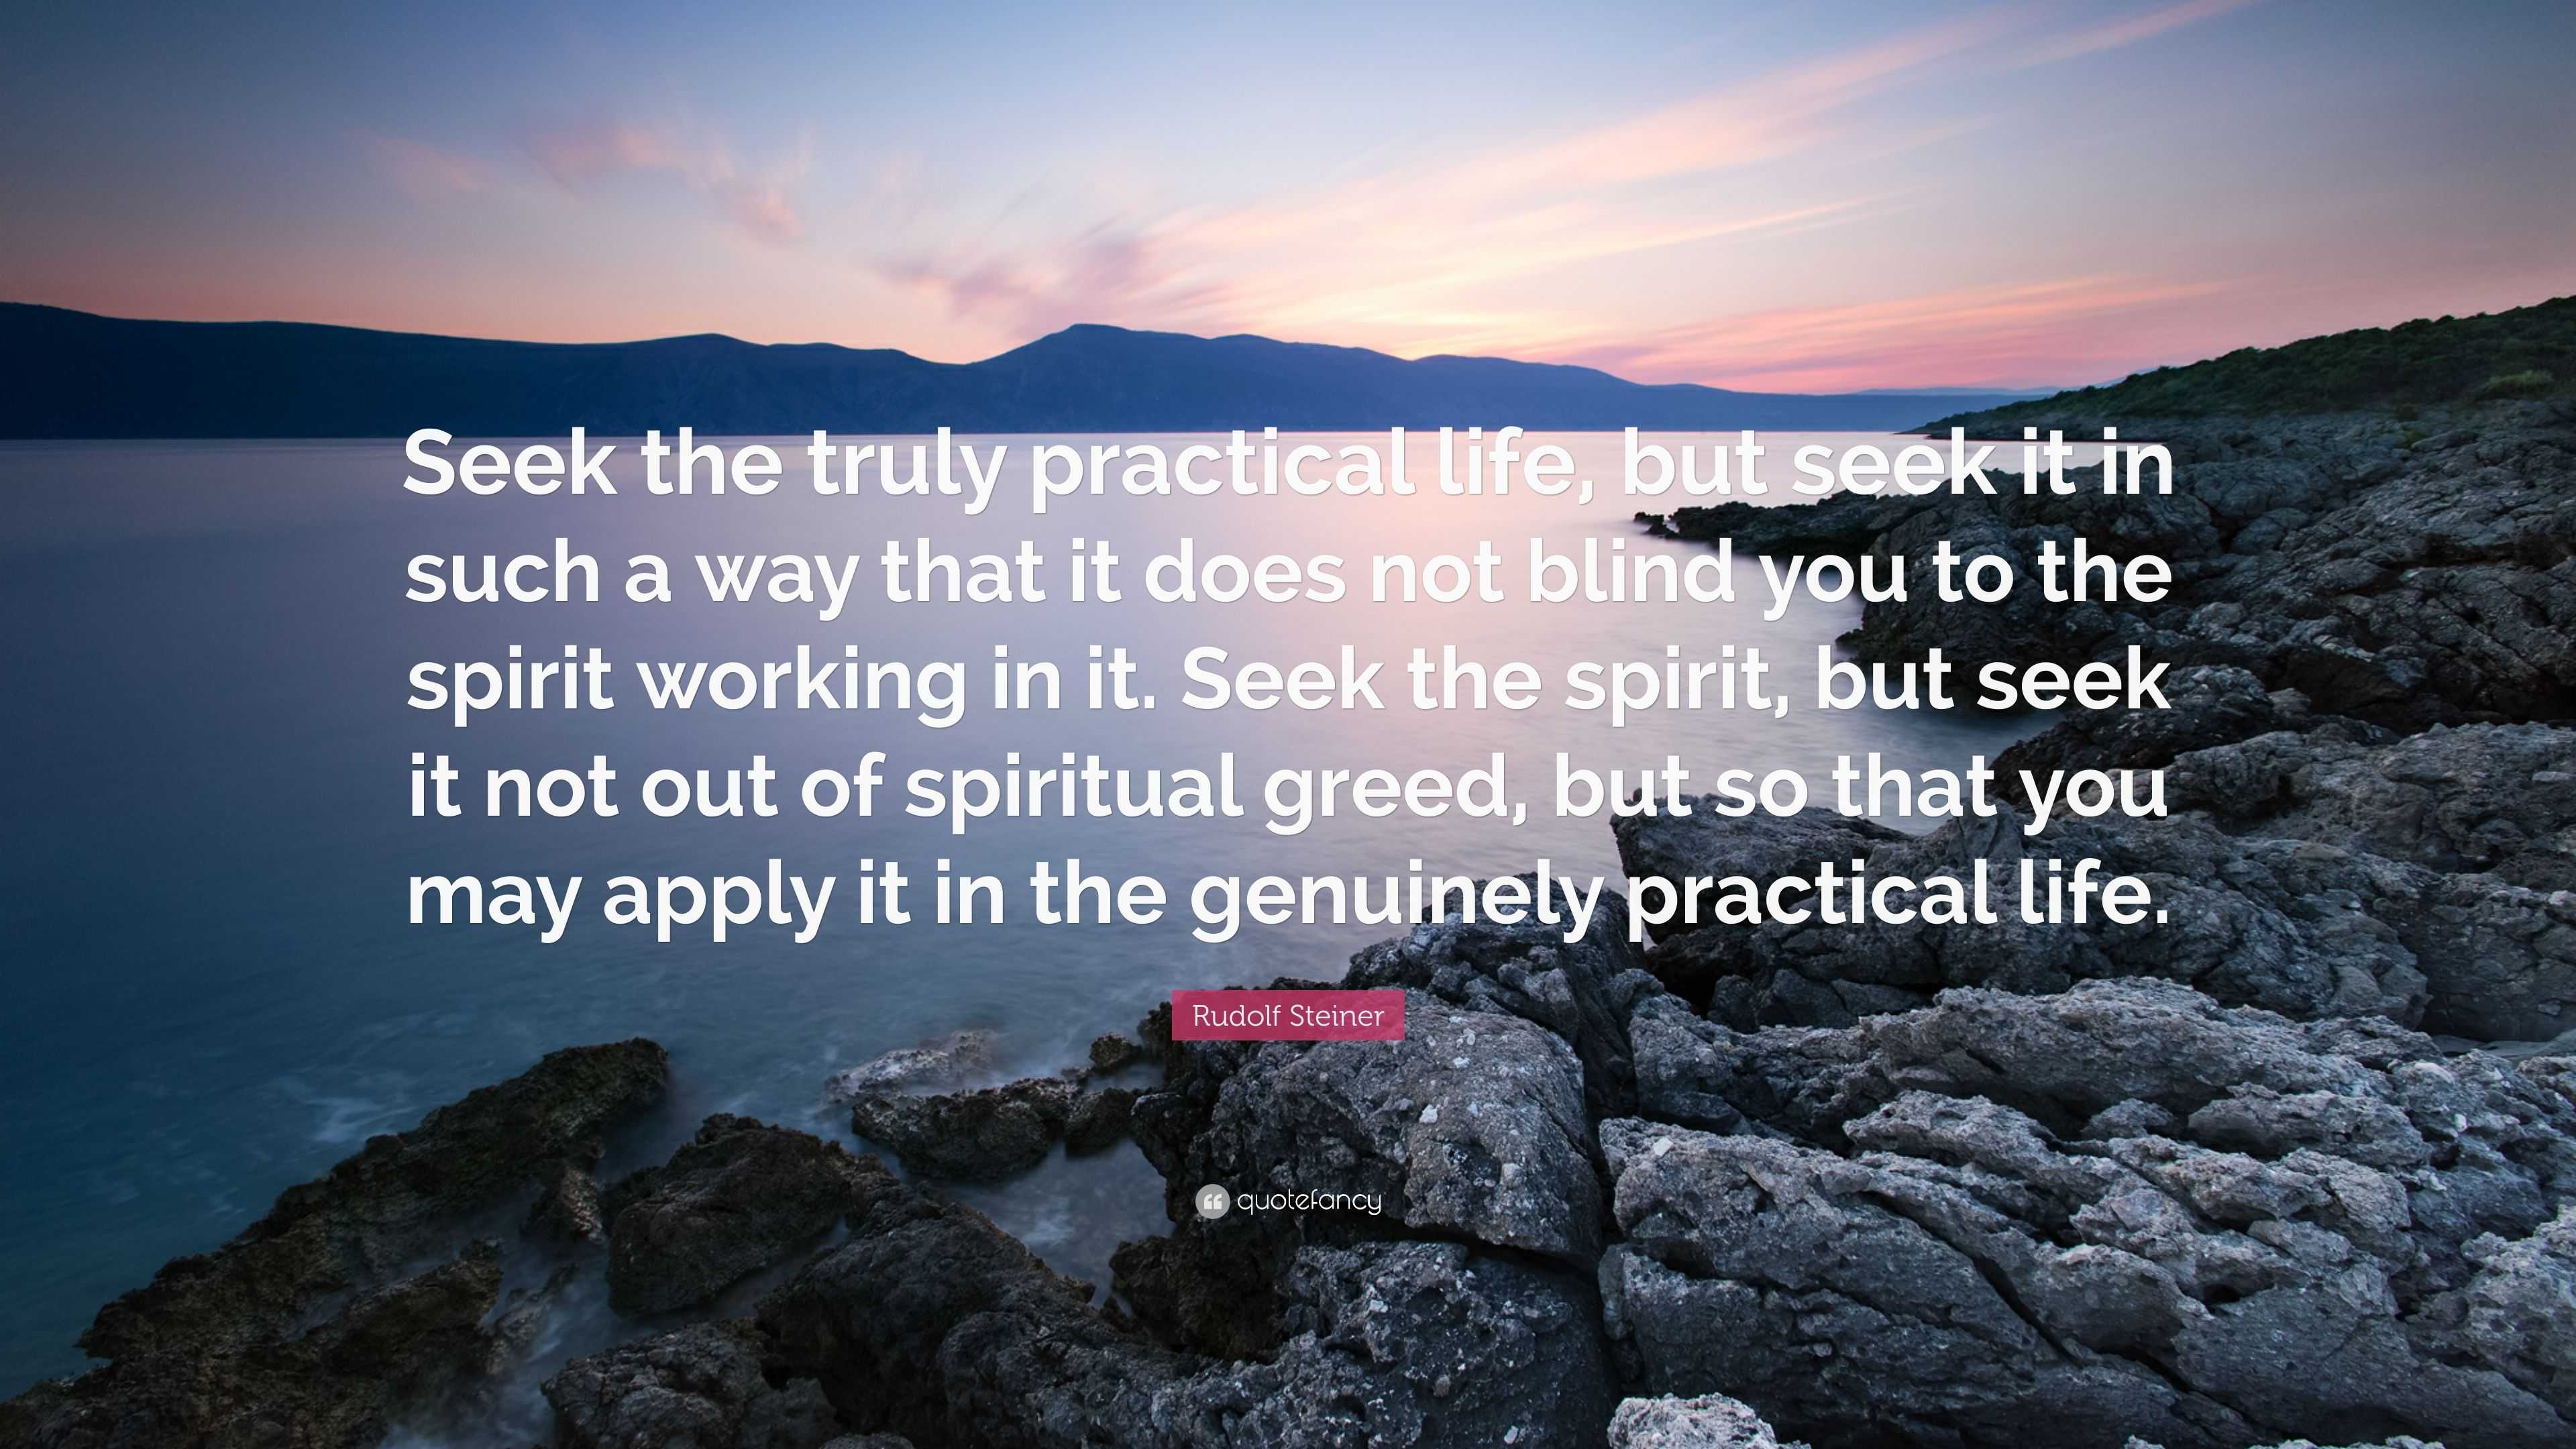 Rudolf Steiner Quote: "Seek the truly practical life, but ...